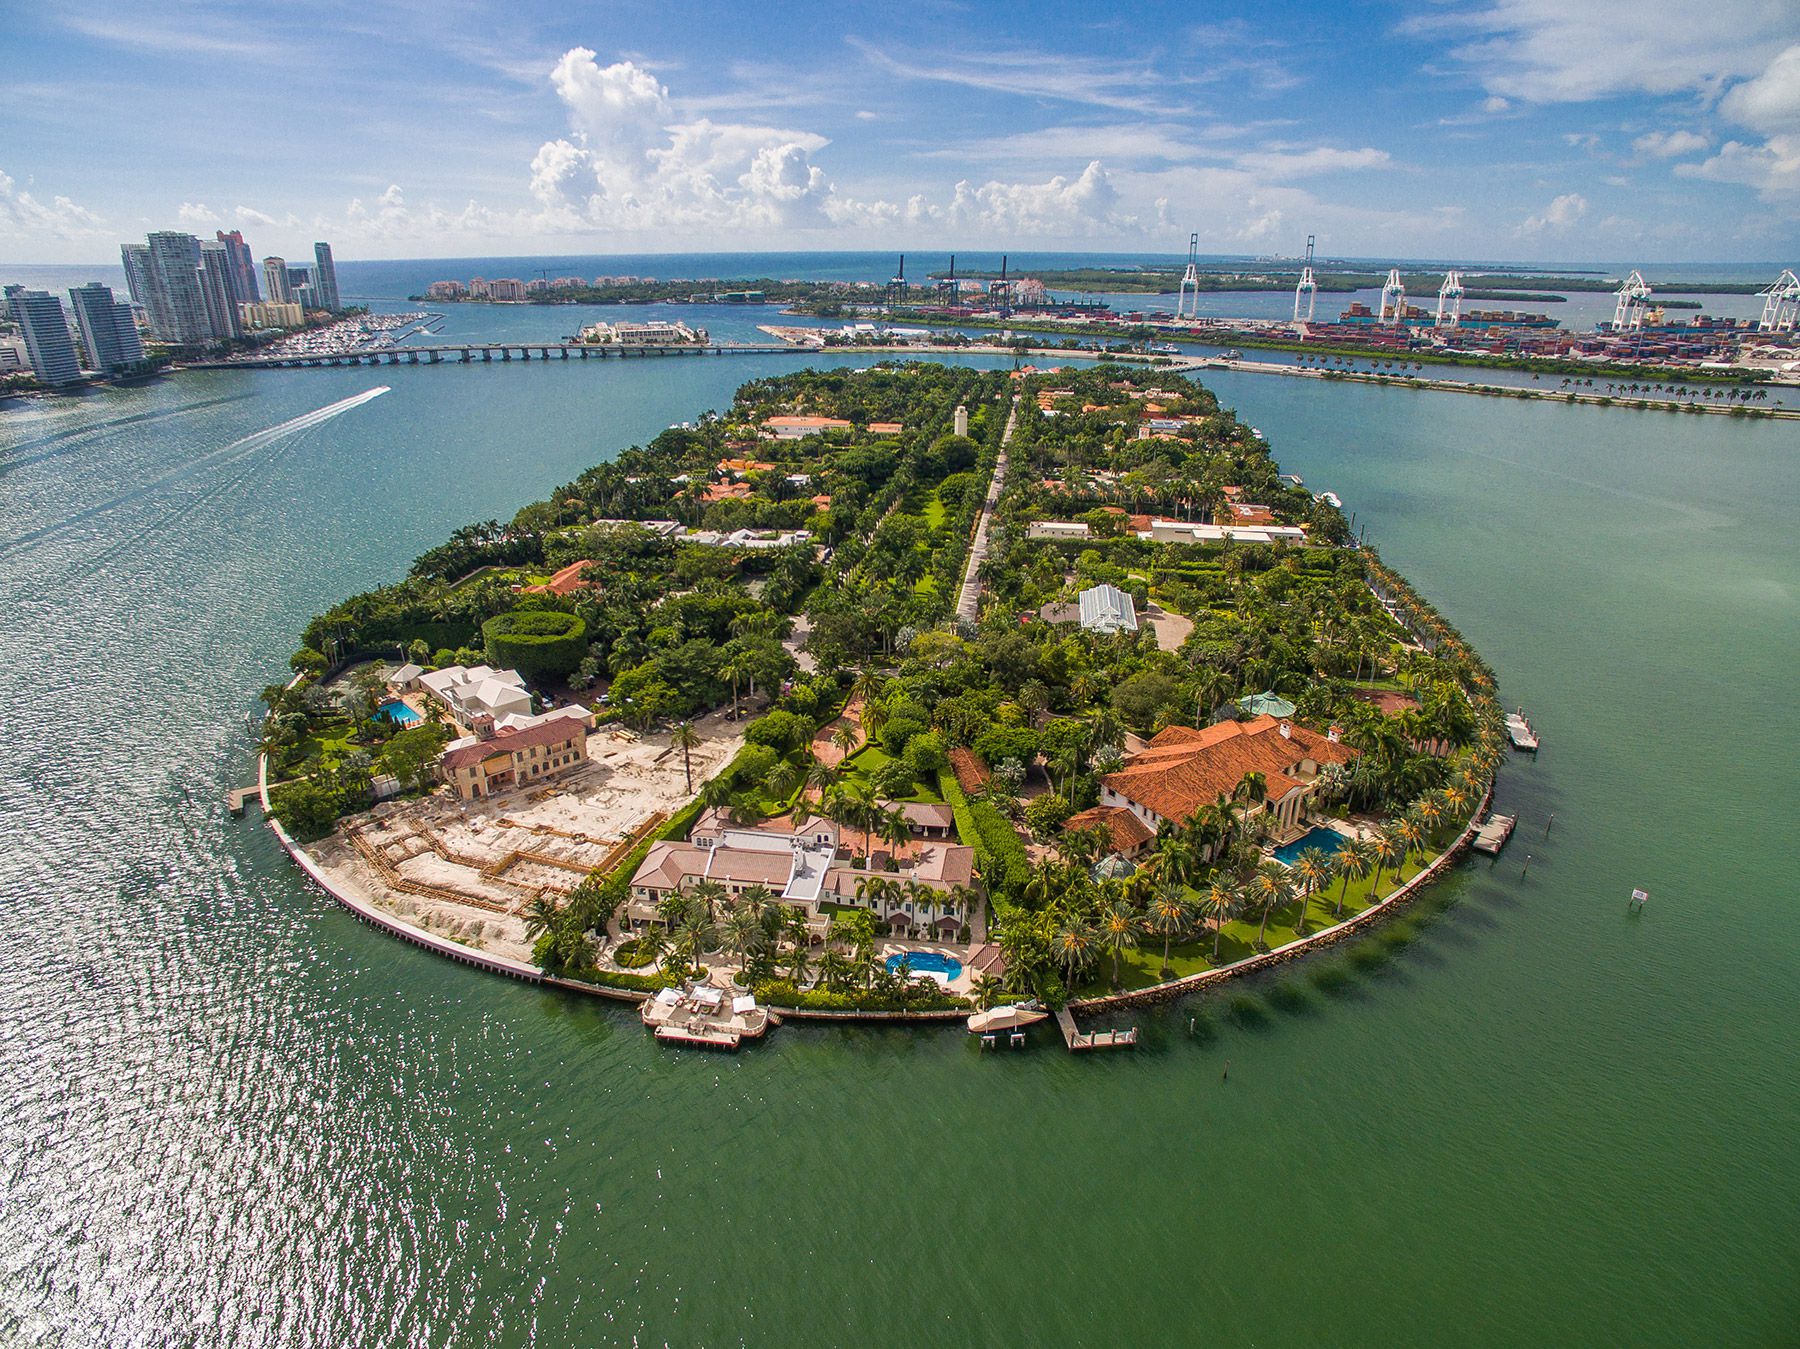 46 Star Island Previously The Most Expensive Home For Sale In Miami